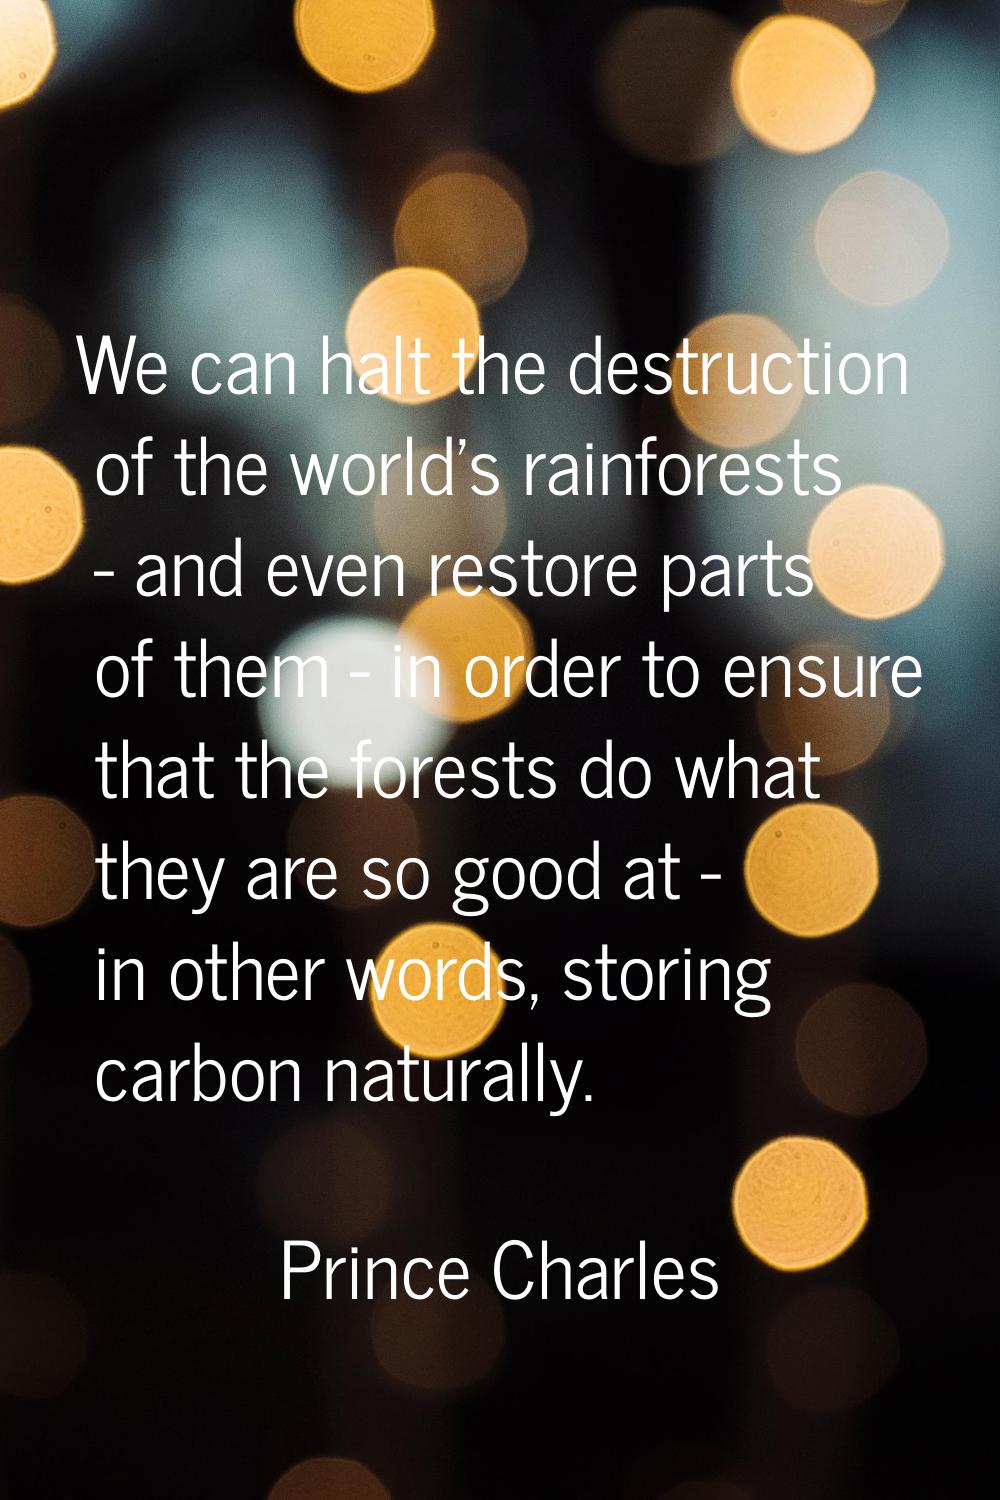 We can halt the destruction of the world's rainforests - and even restore parts of them - in order 